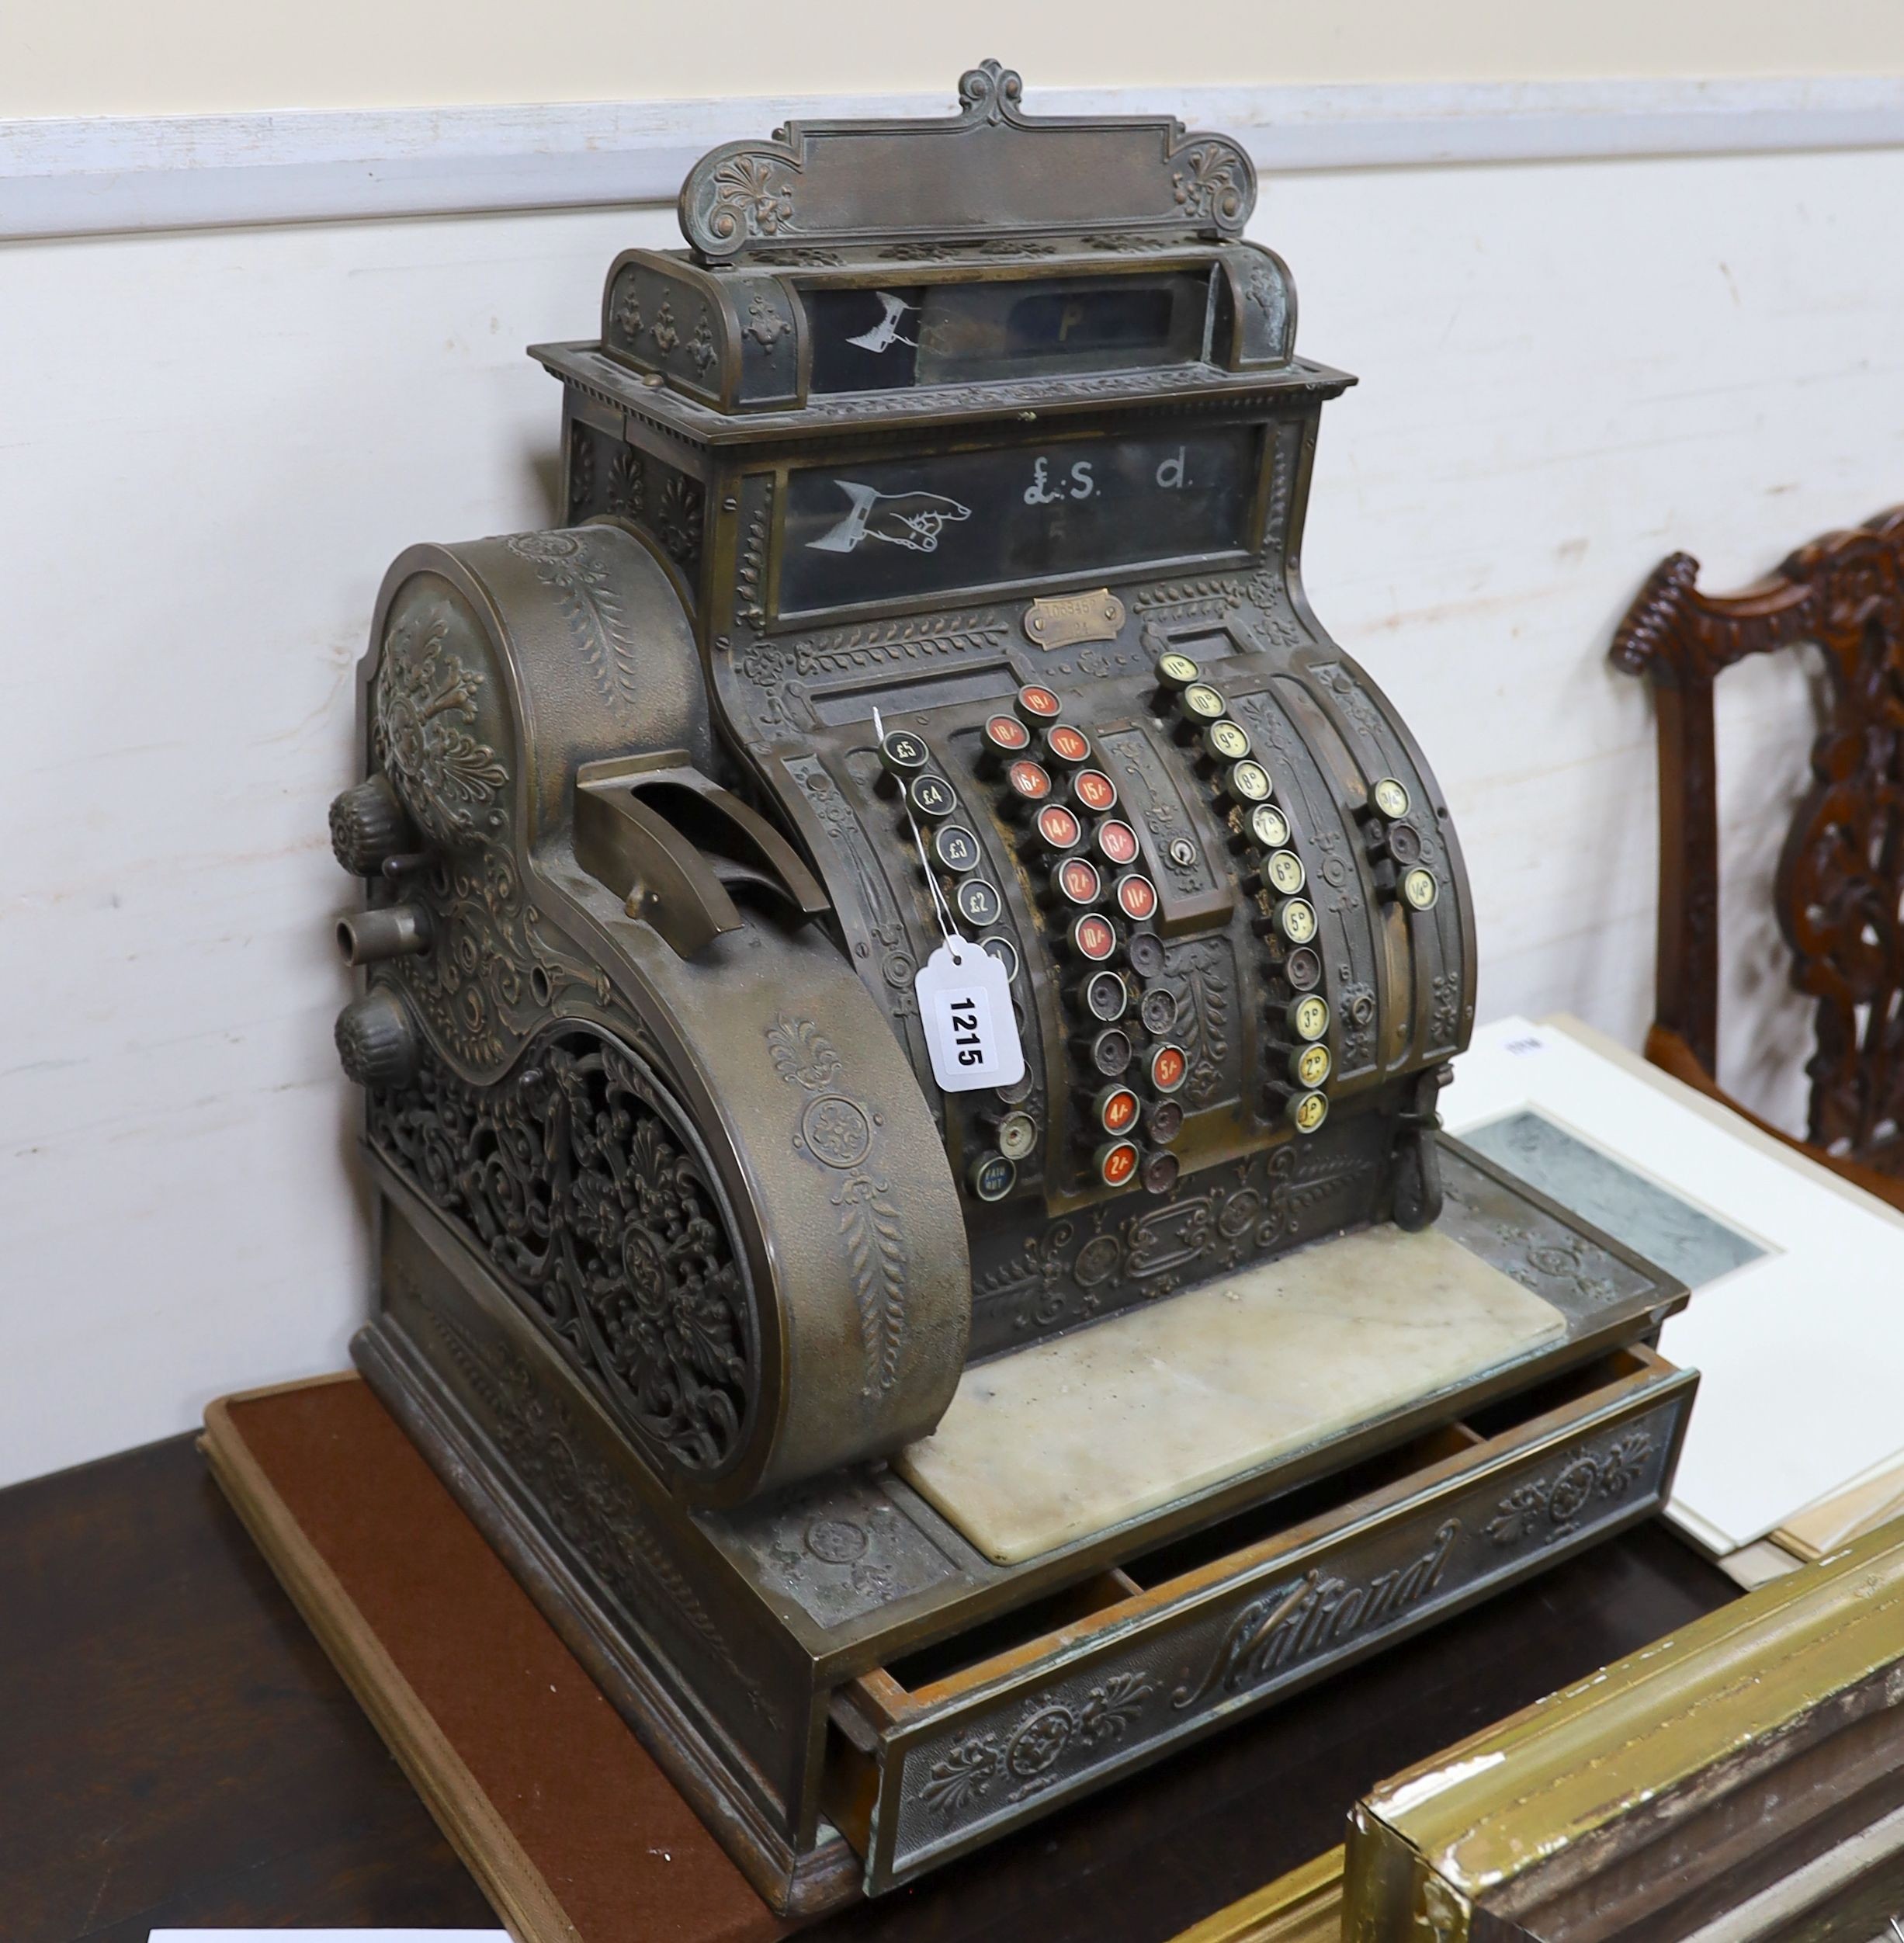 An early 20th century American National cash register, Serial Number 1068452/484, width 47cm, depth 39cm, height 57cm